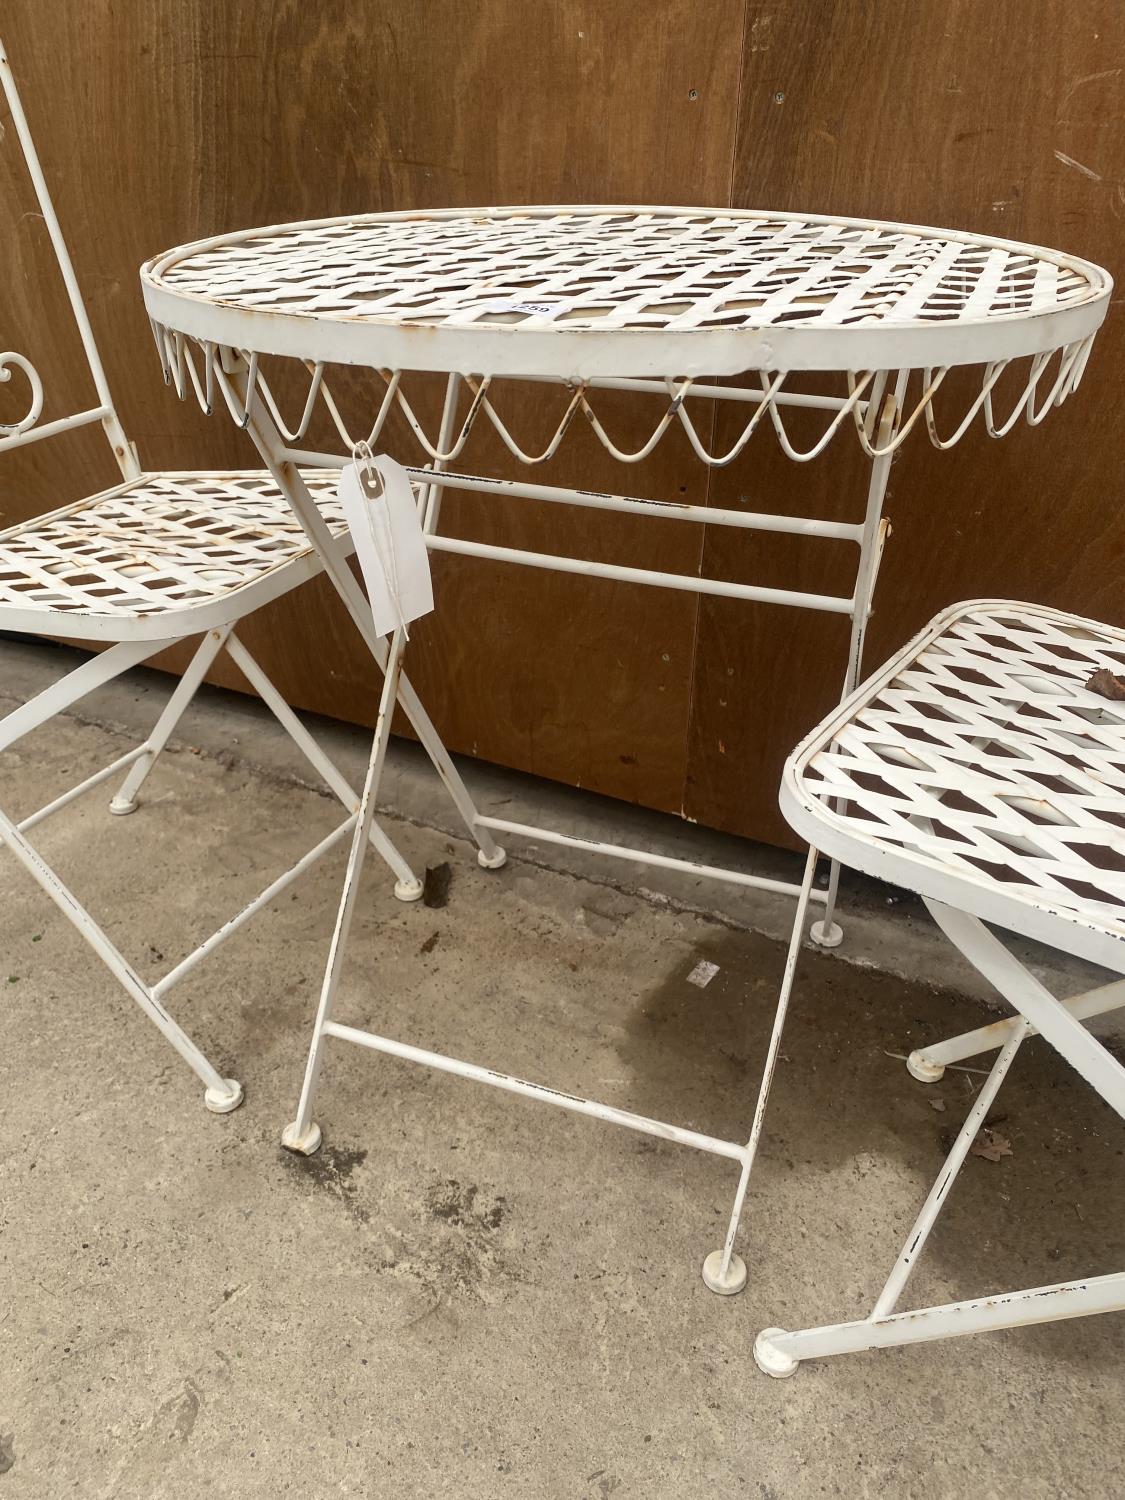 A DECORATIVE WROUGHT IRON BISTRO SET COMPRISING OF A ROUND TABLE AND TWO CHAIRS - Image 3 of 5